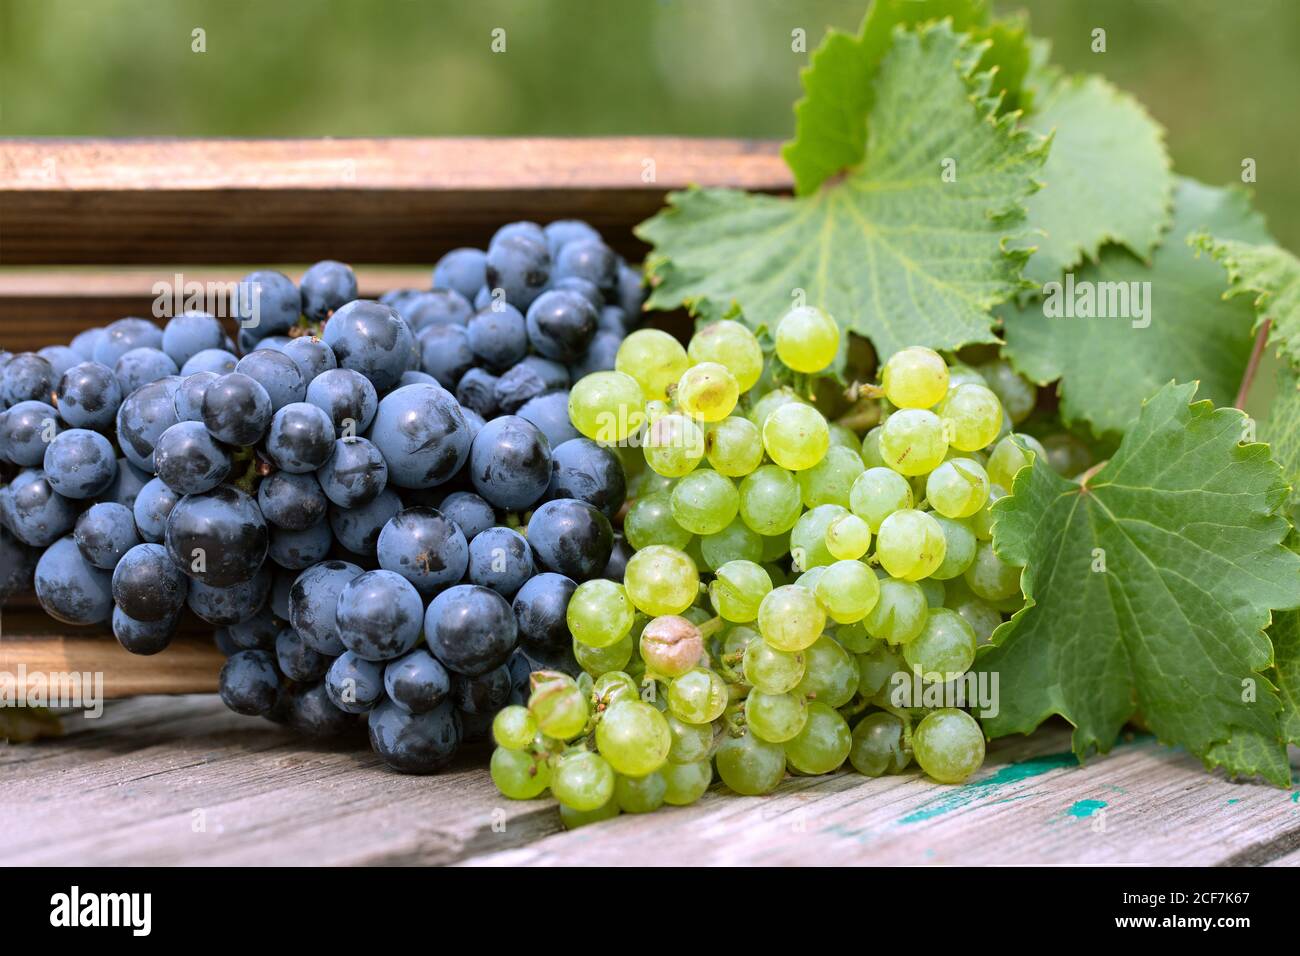 Bunch of blue and green grapes in wooden box on wooden table Stock Photo